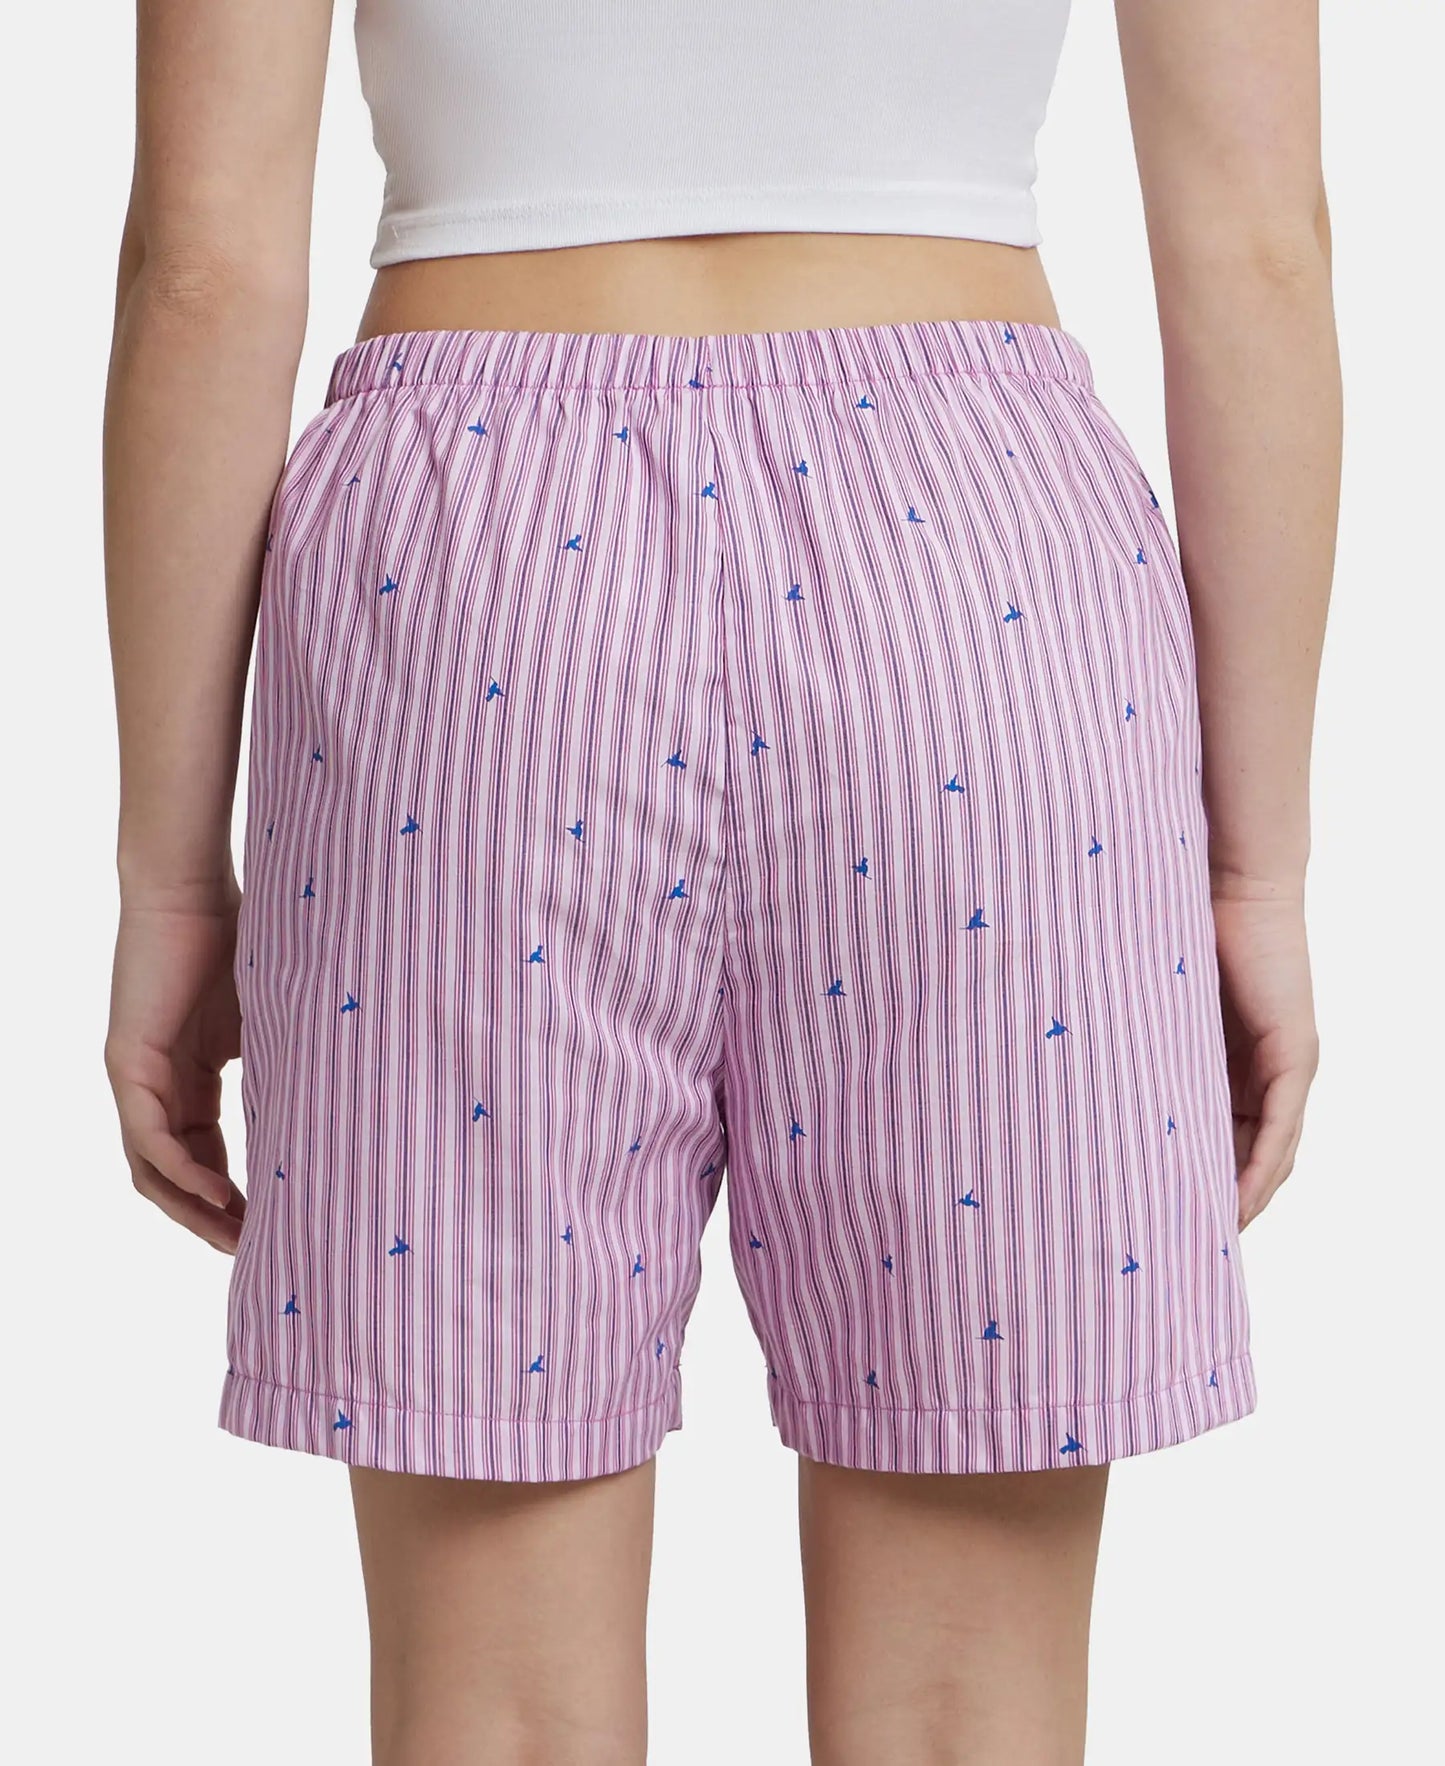 Super Combed Cotton Yarn Dyed Woven Relaxed Fit Striped Shorts with Side Pockets - Lavender Scent Assorted Checks-3